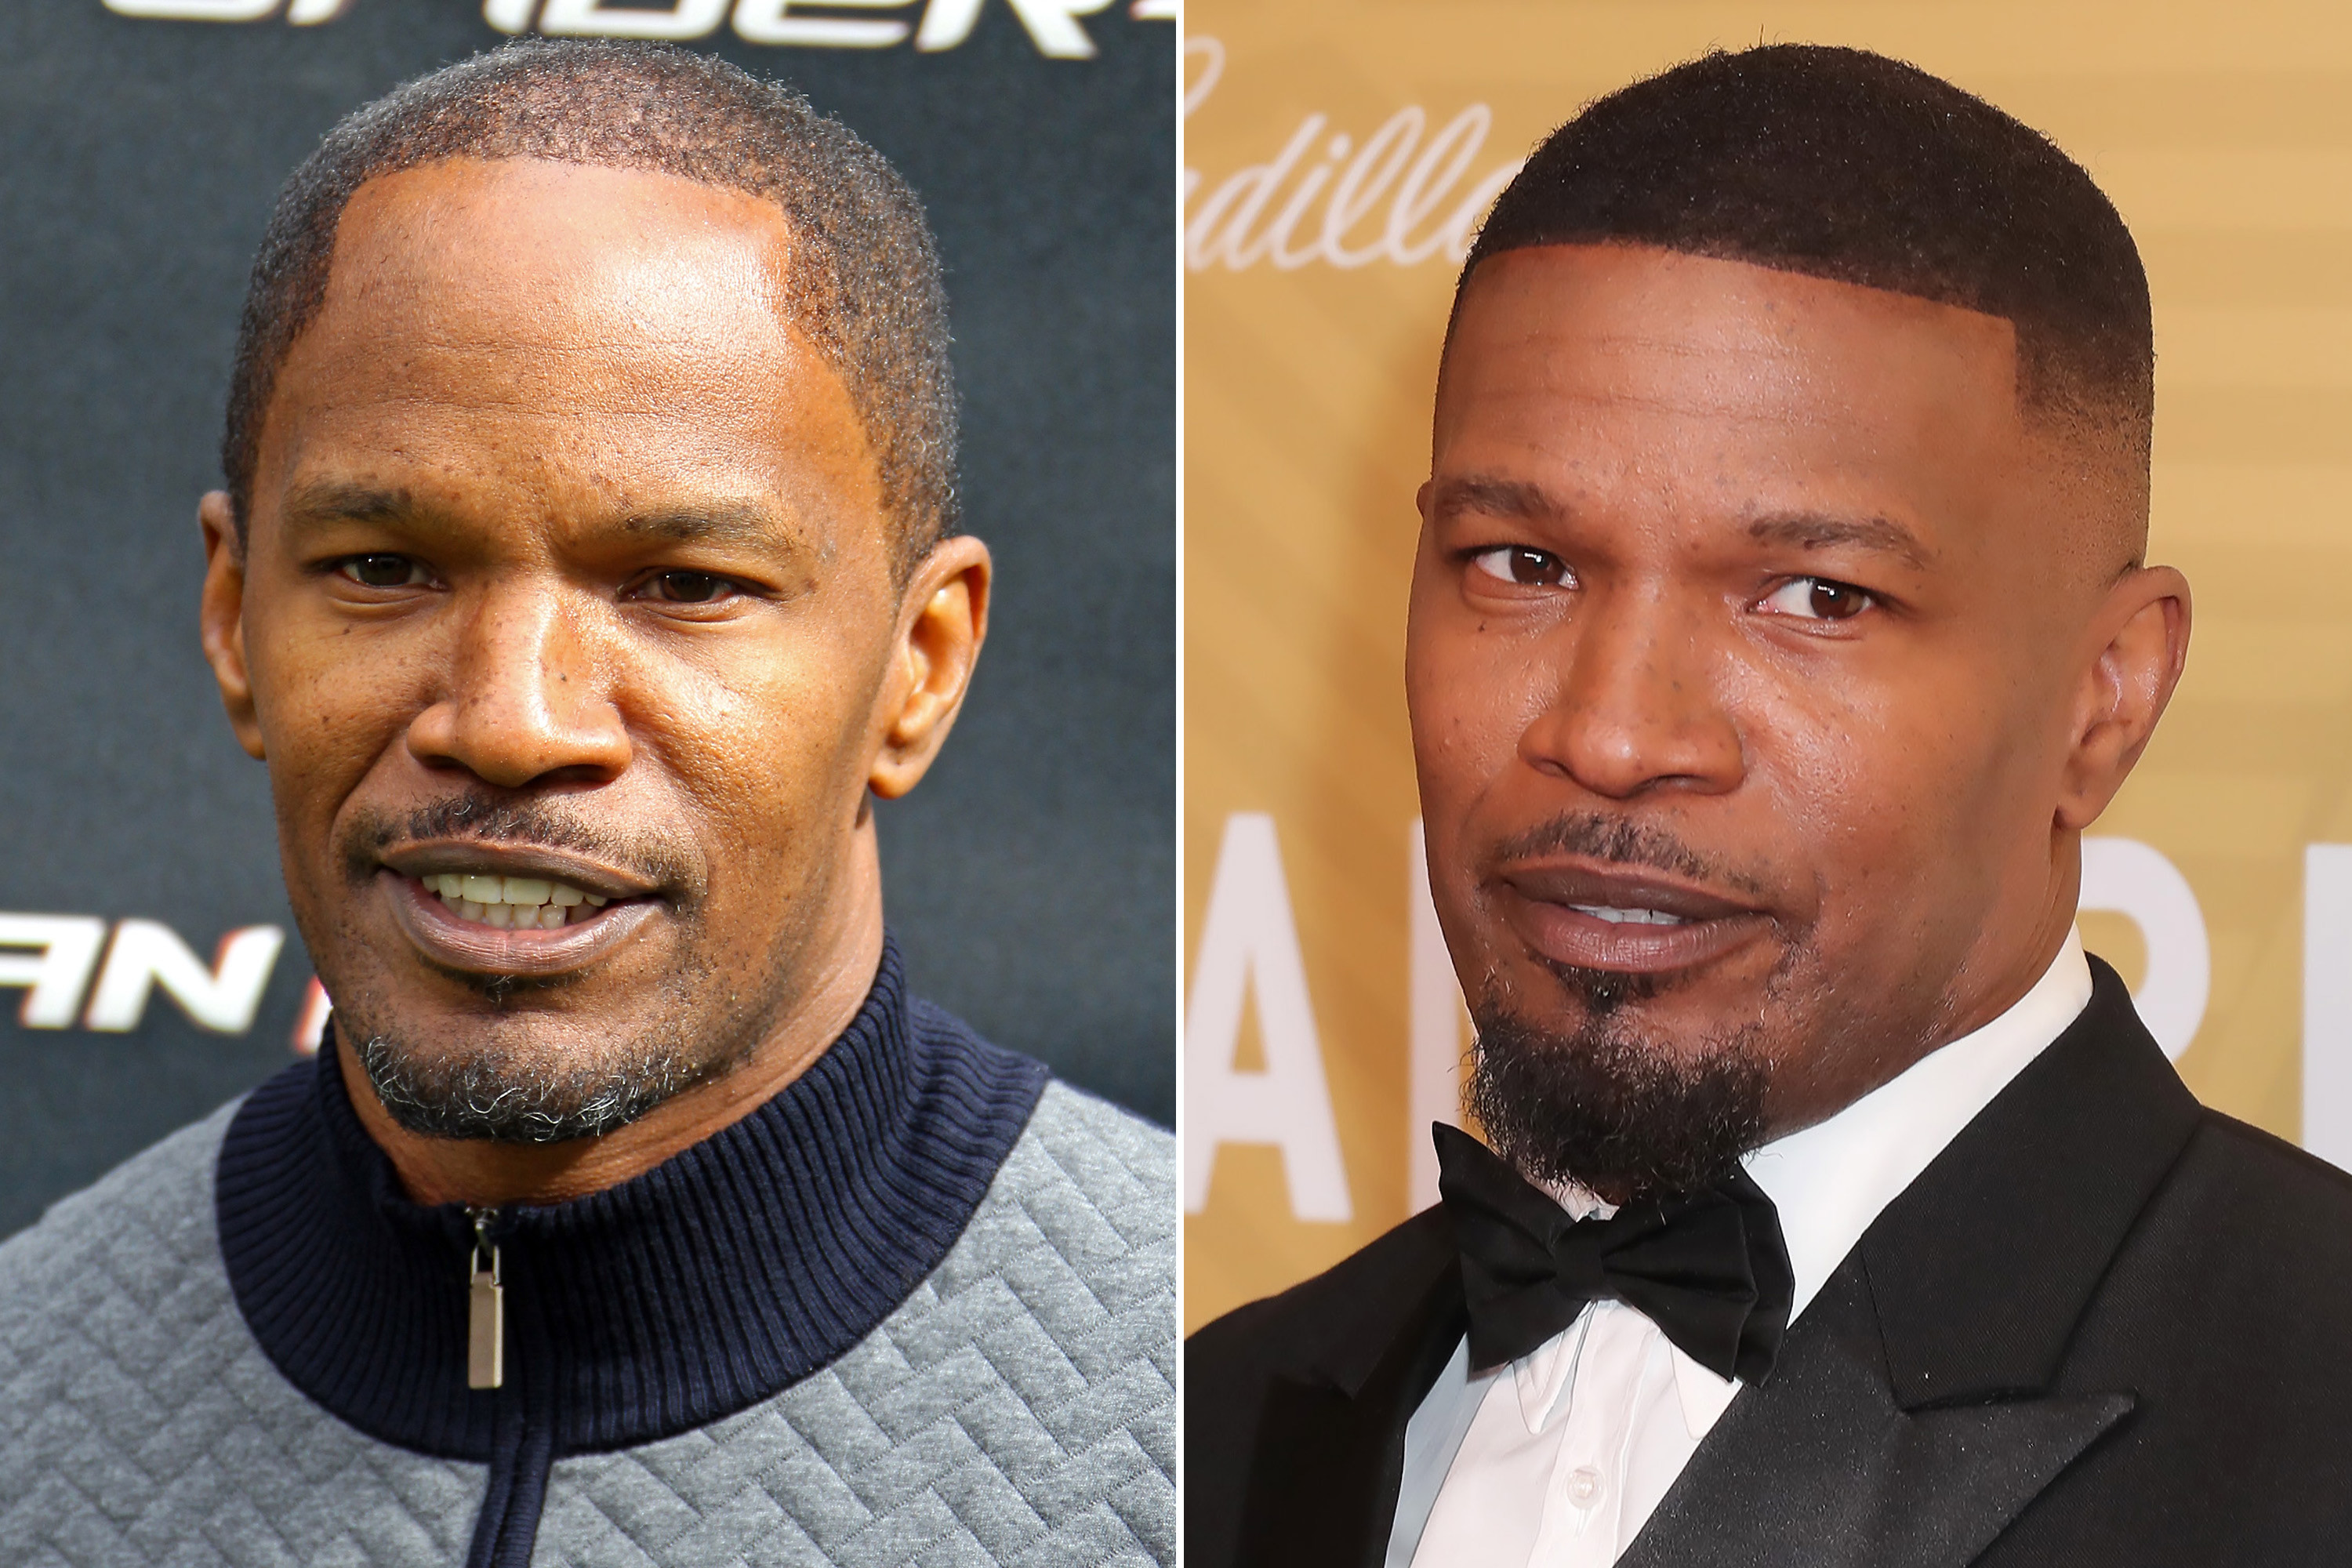 Jamie Foxx’s hairline got a lot lower from 2013 to now. 